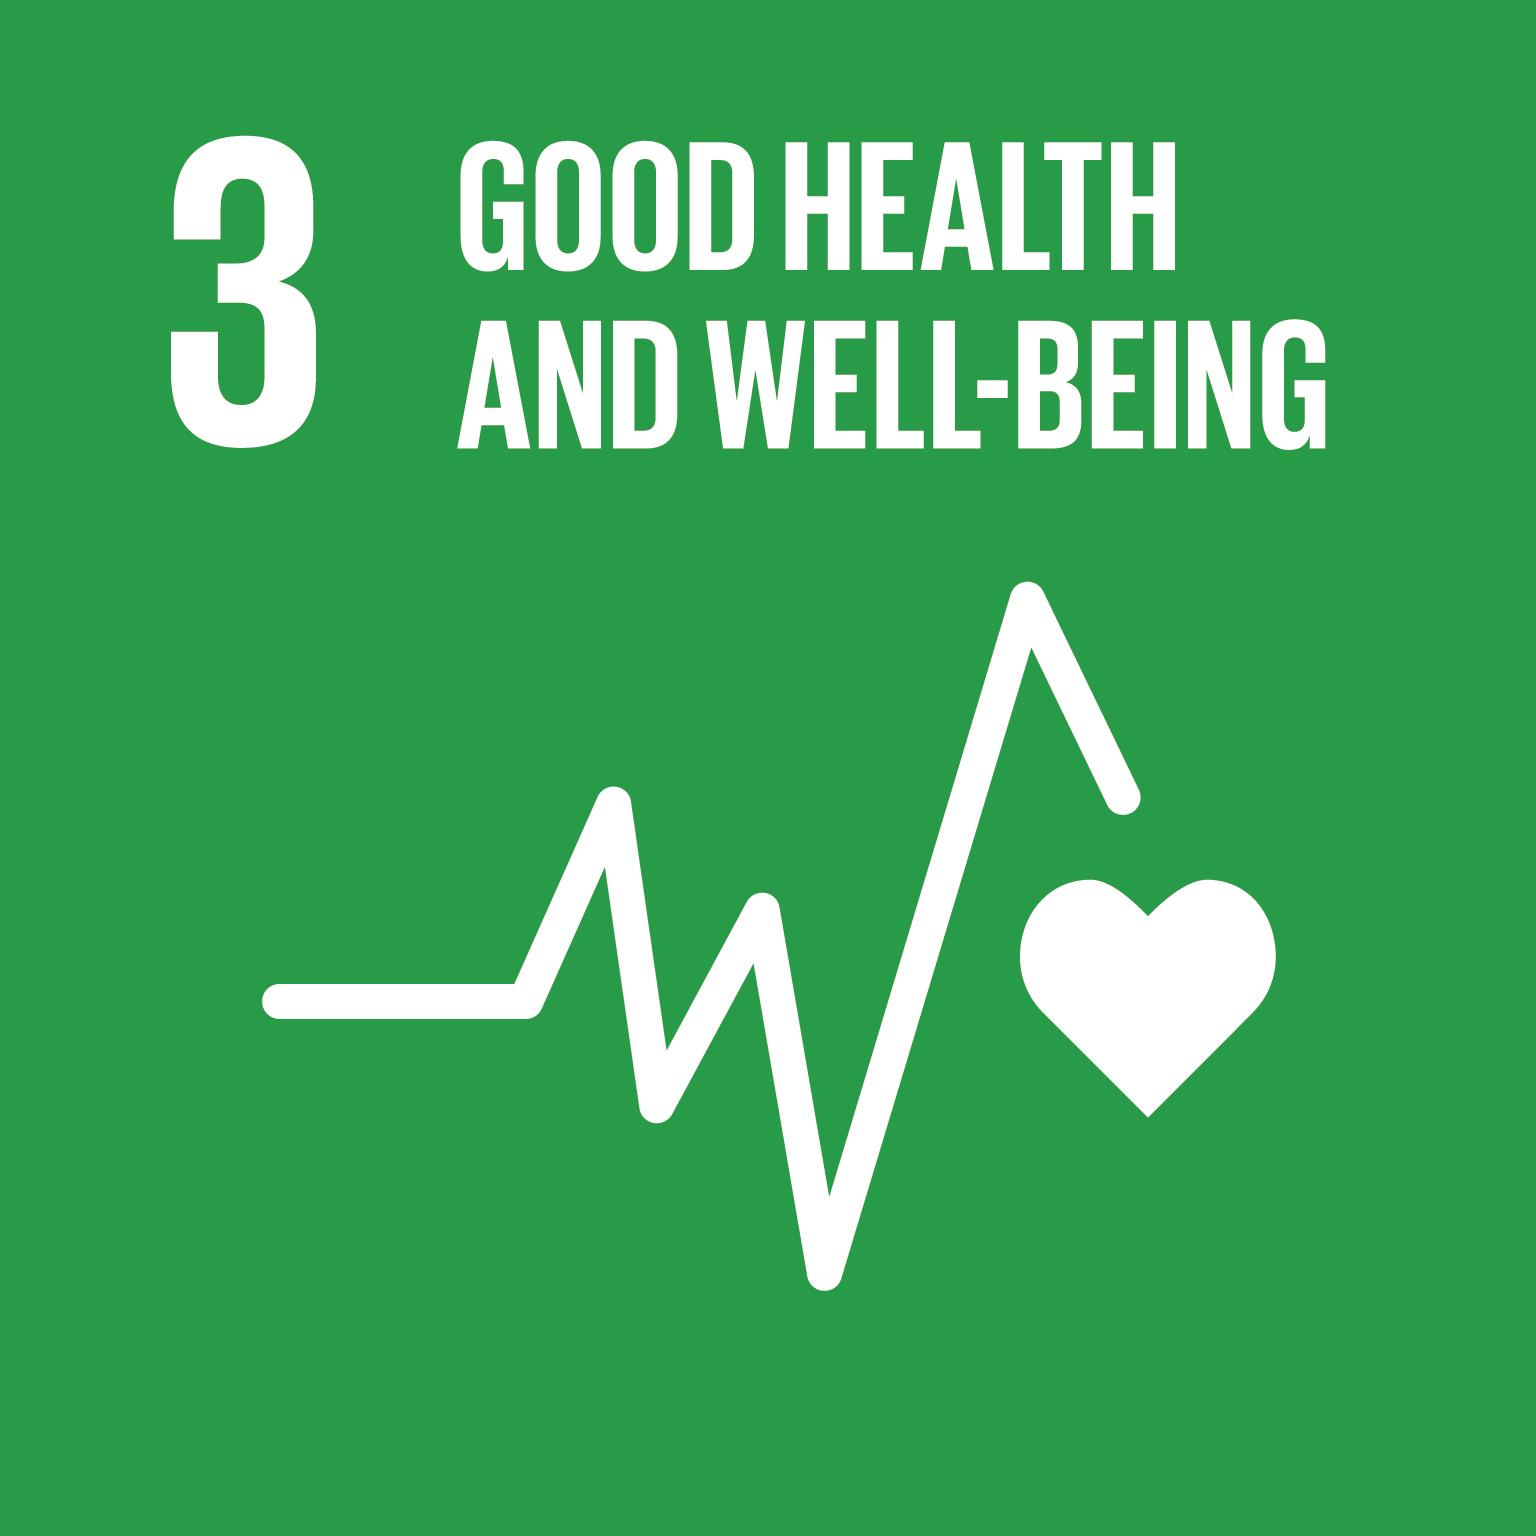 SDG 3 - Good health and well being